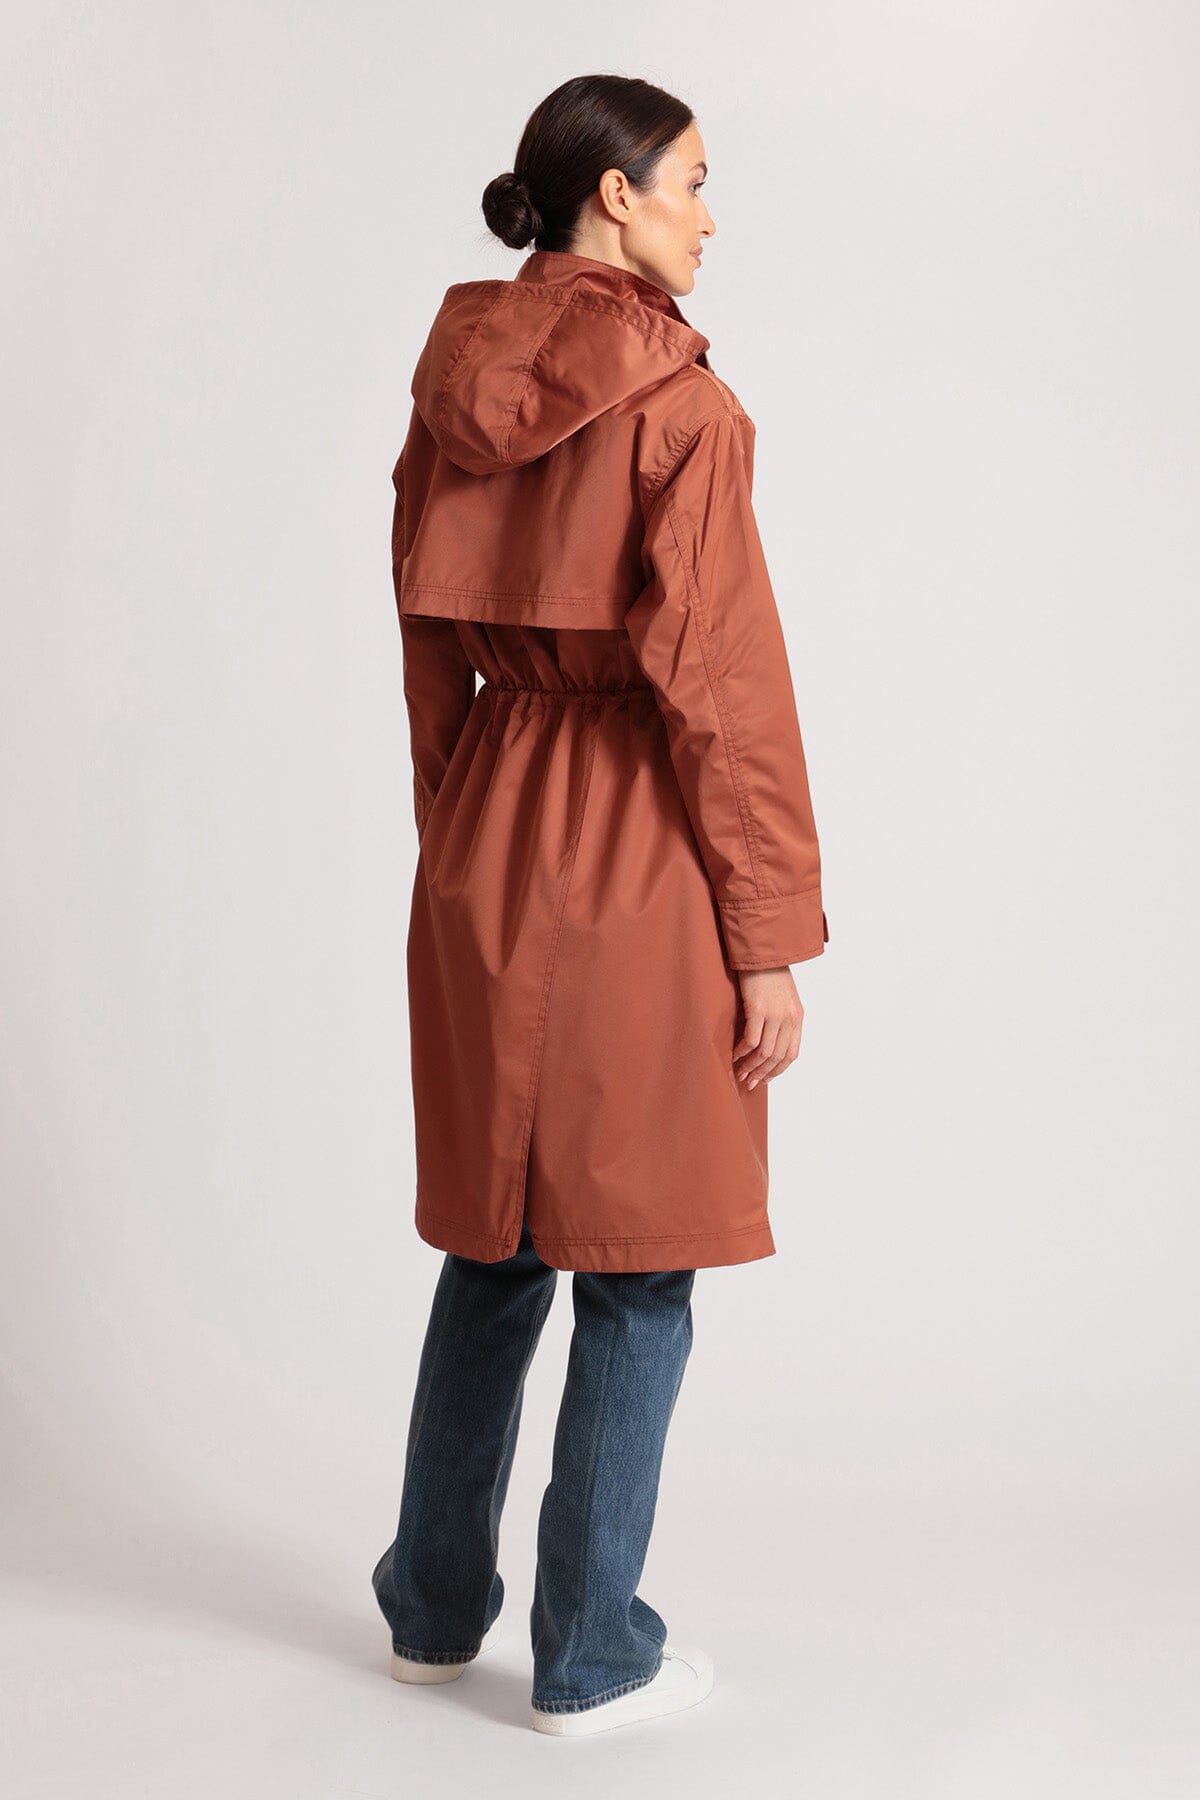 Women's orange stylish relaxed water resistant rain anorak coat raincoat outerwear for Fall fashion by Avec Les Filles